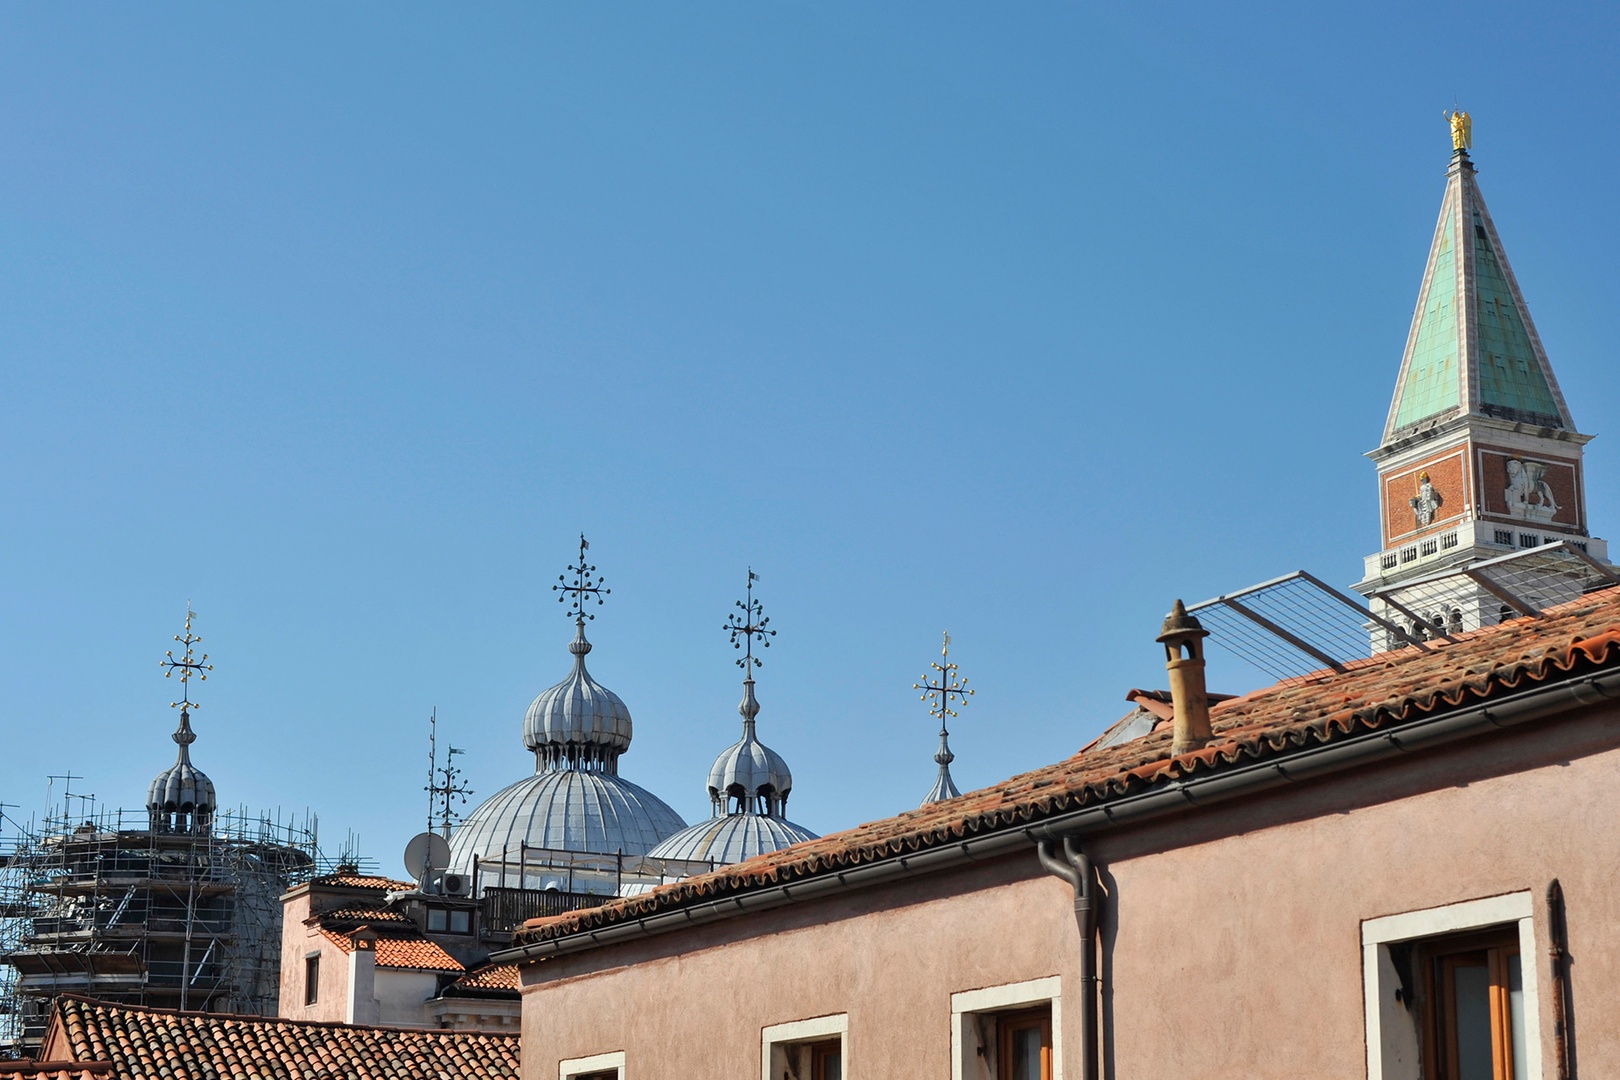 The cupolas of San Marco are not far away!